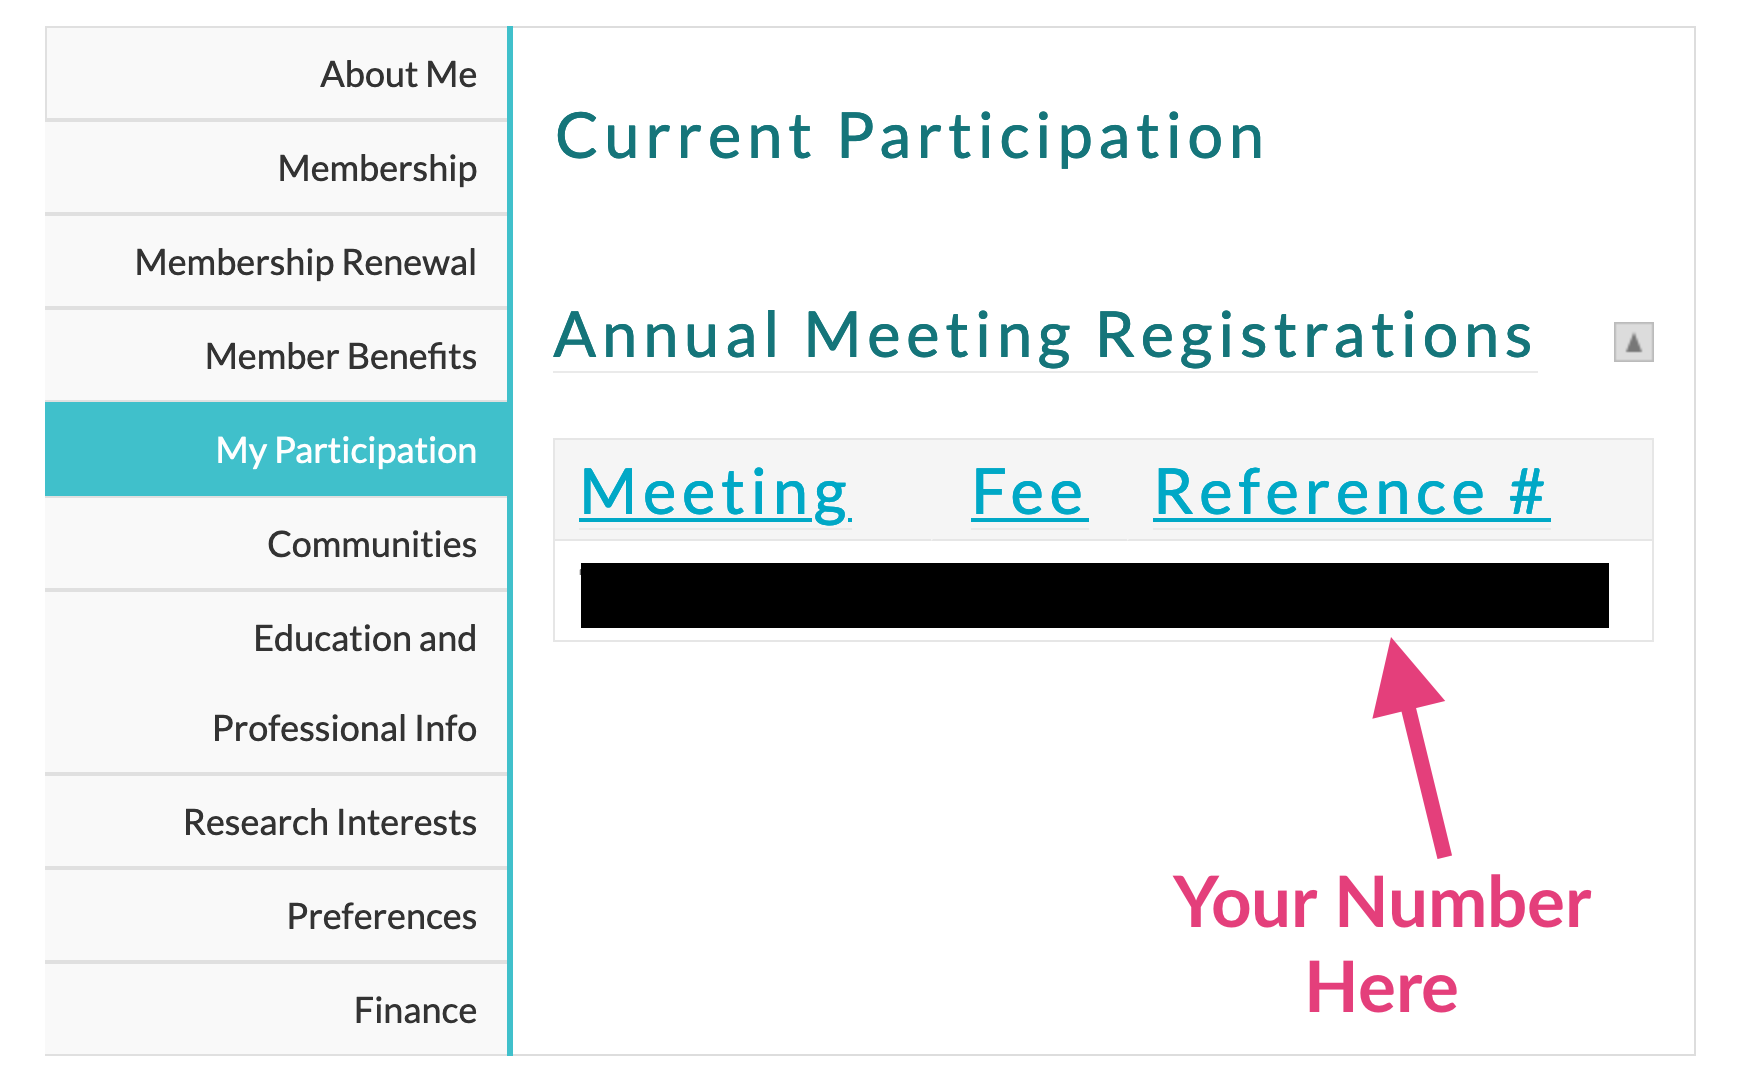 A screenshot of an AAR member profile with an arrow pointing to the section that says "Reference #".